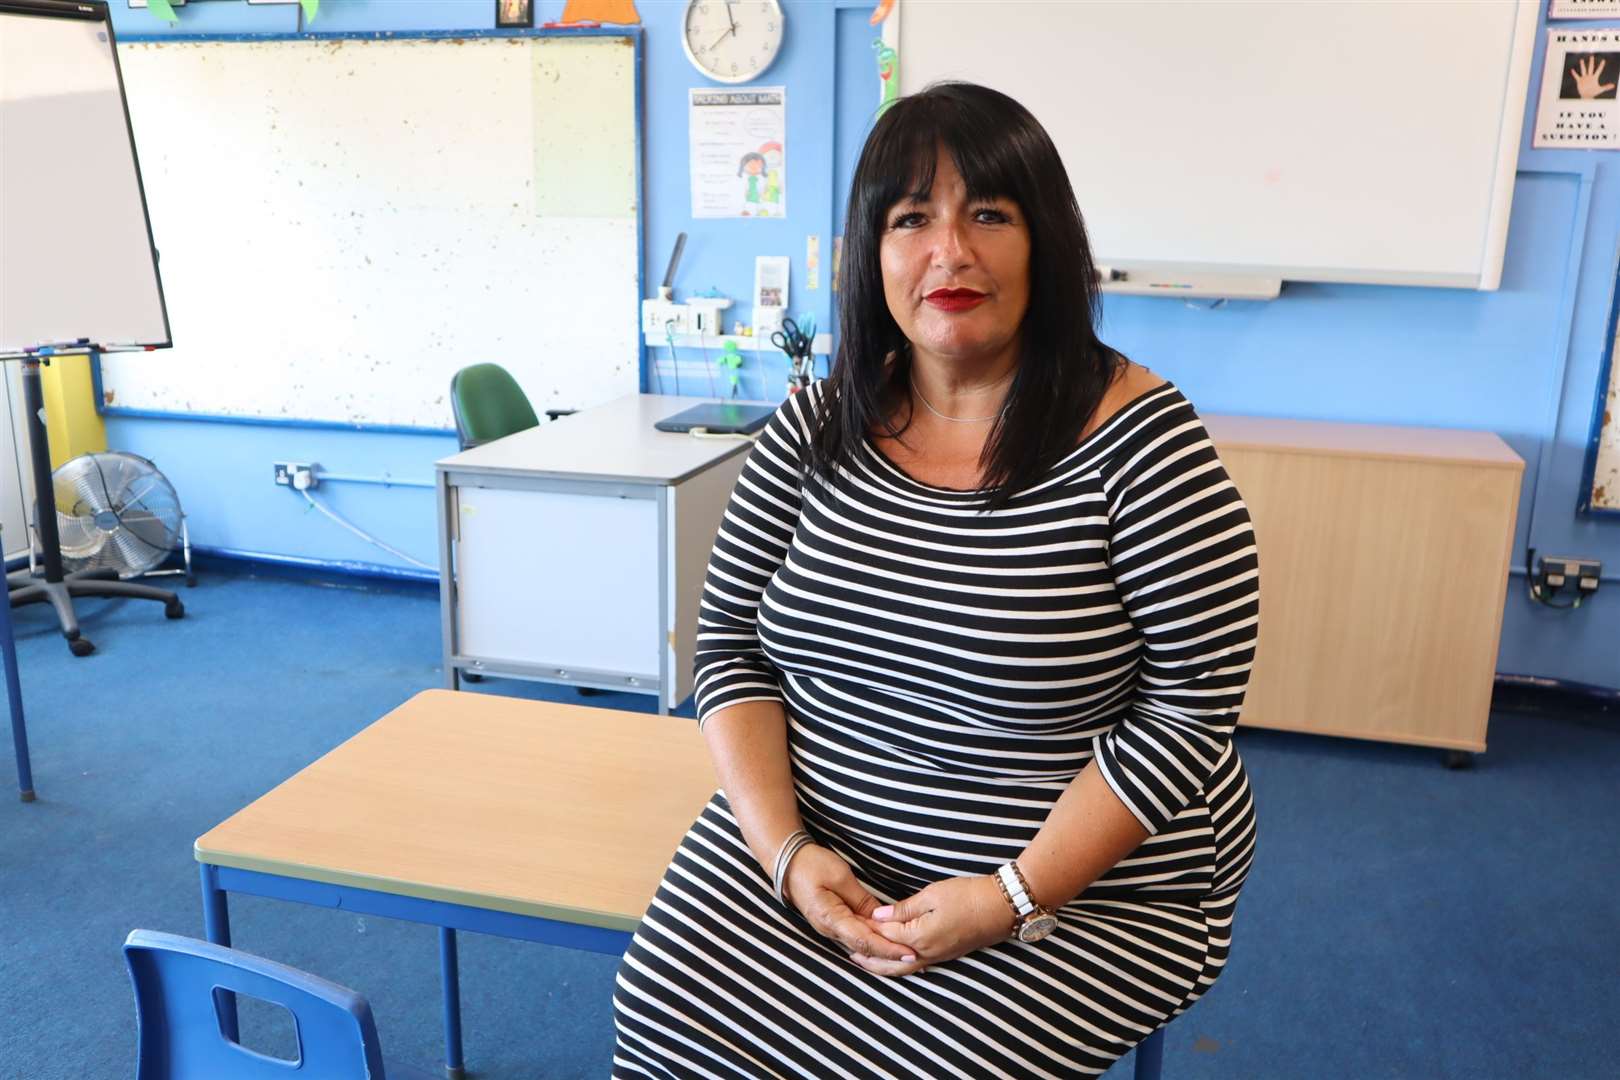 Debbie Wheeler, chief executive officer of the Island Learning Trust which runs Minster Primary School